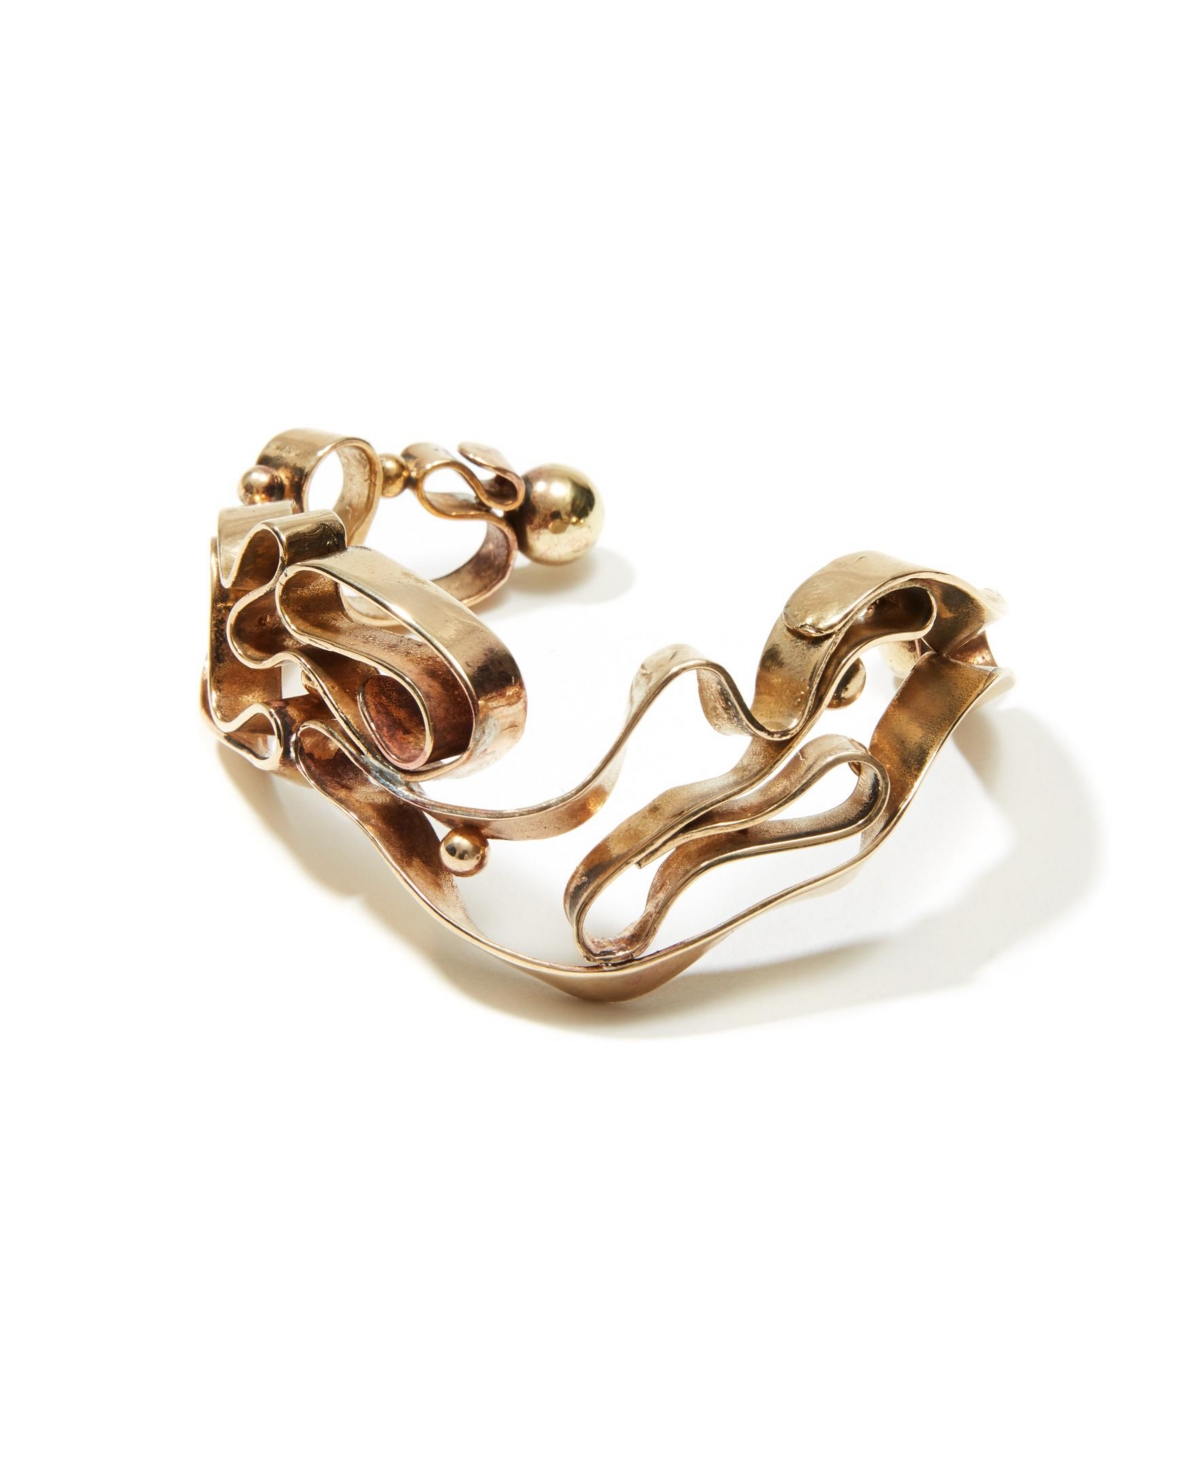 Winding Solid Bracelet - Gold Plated